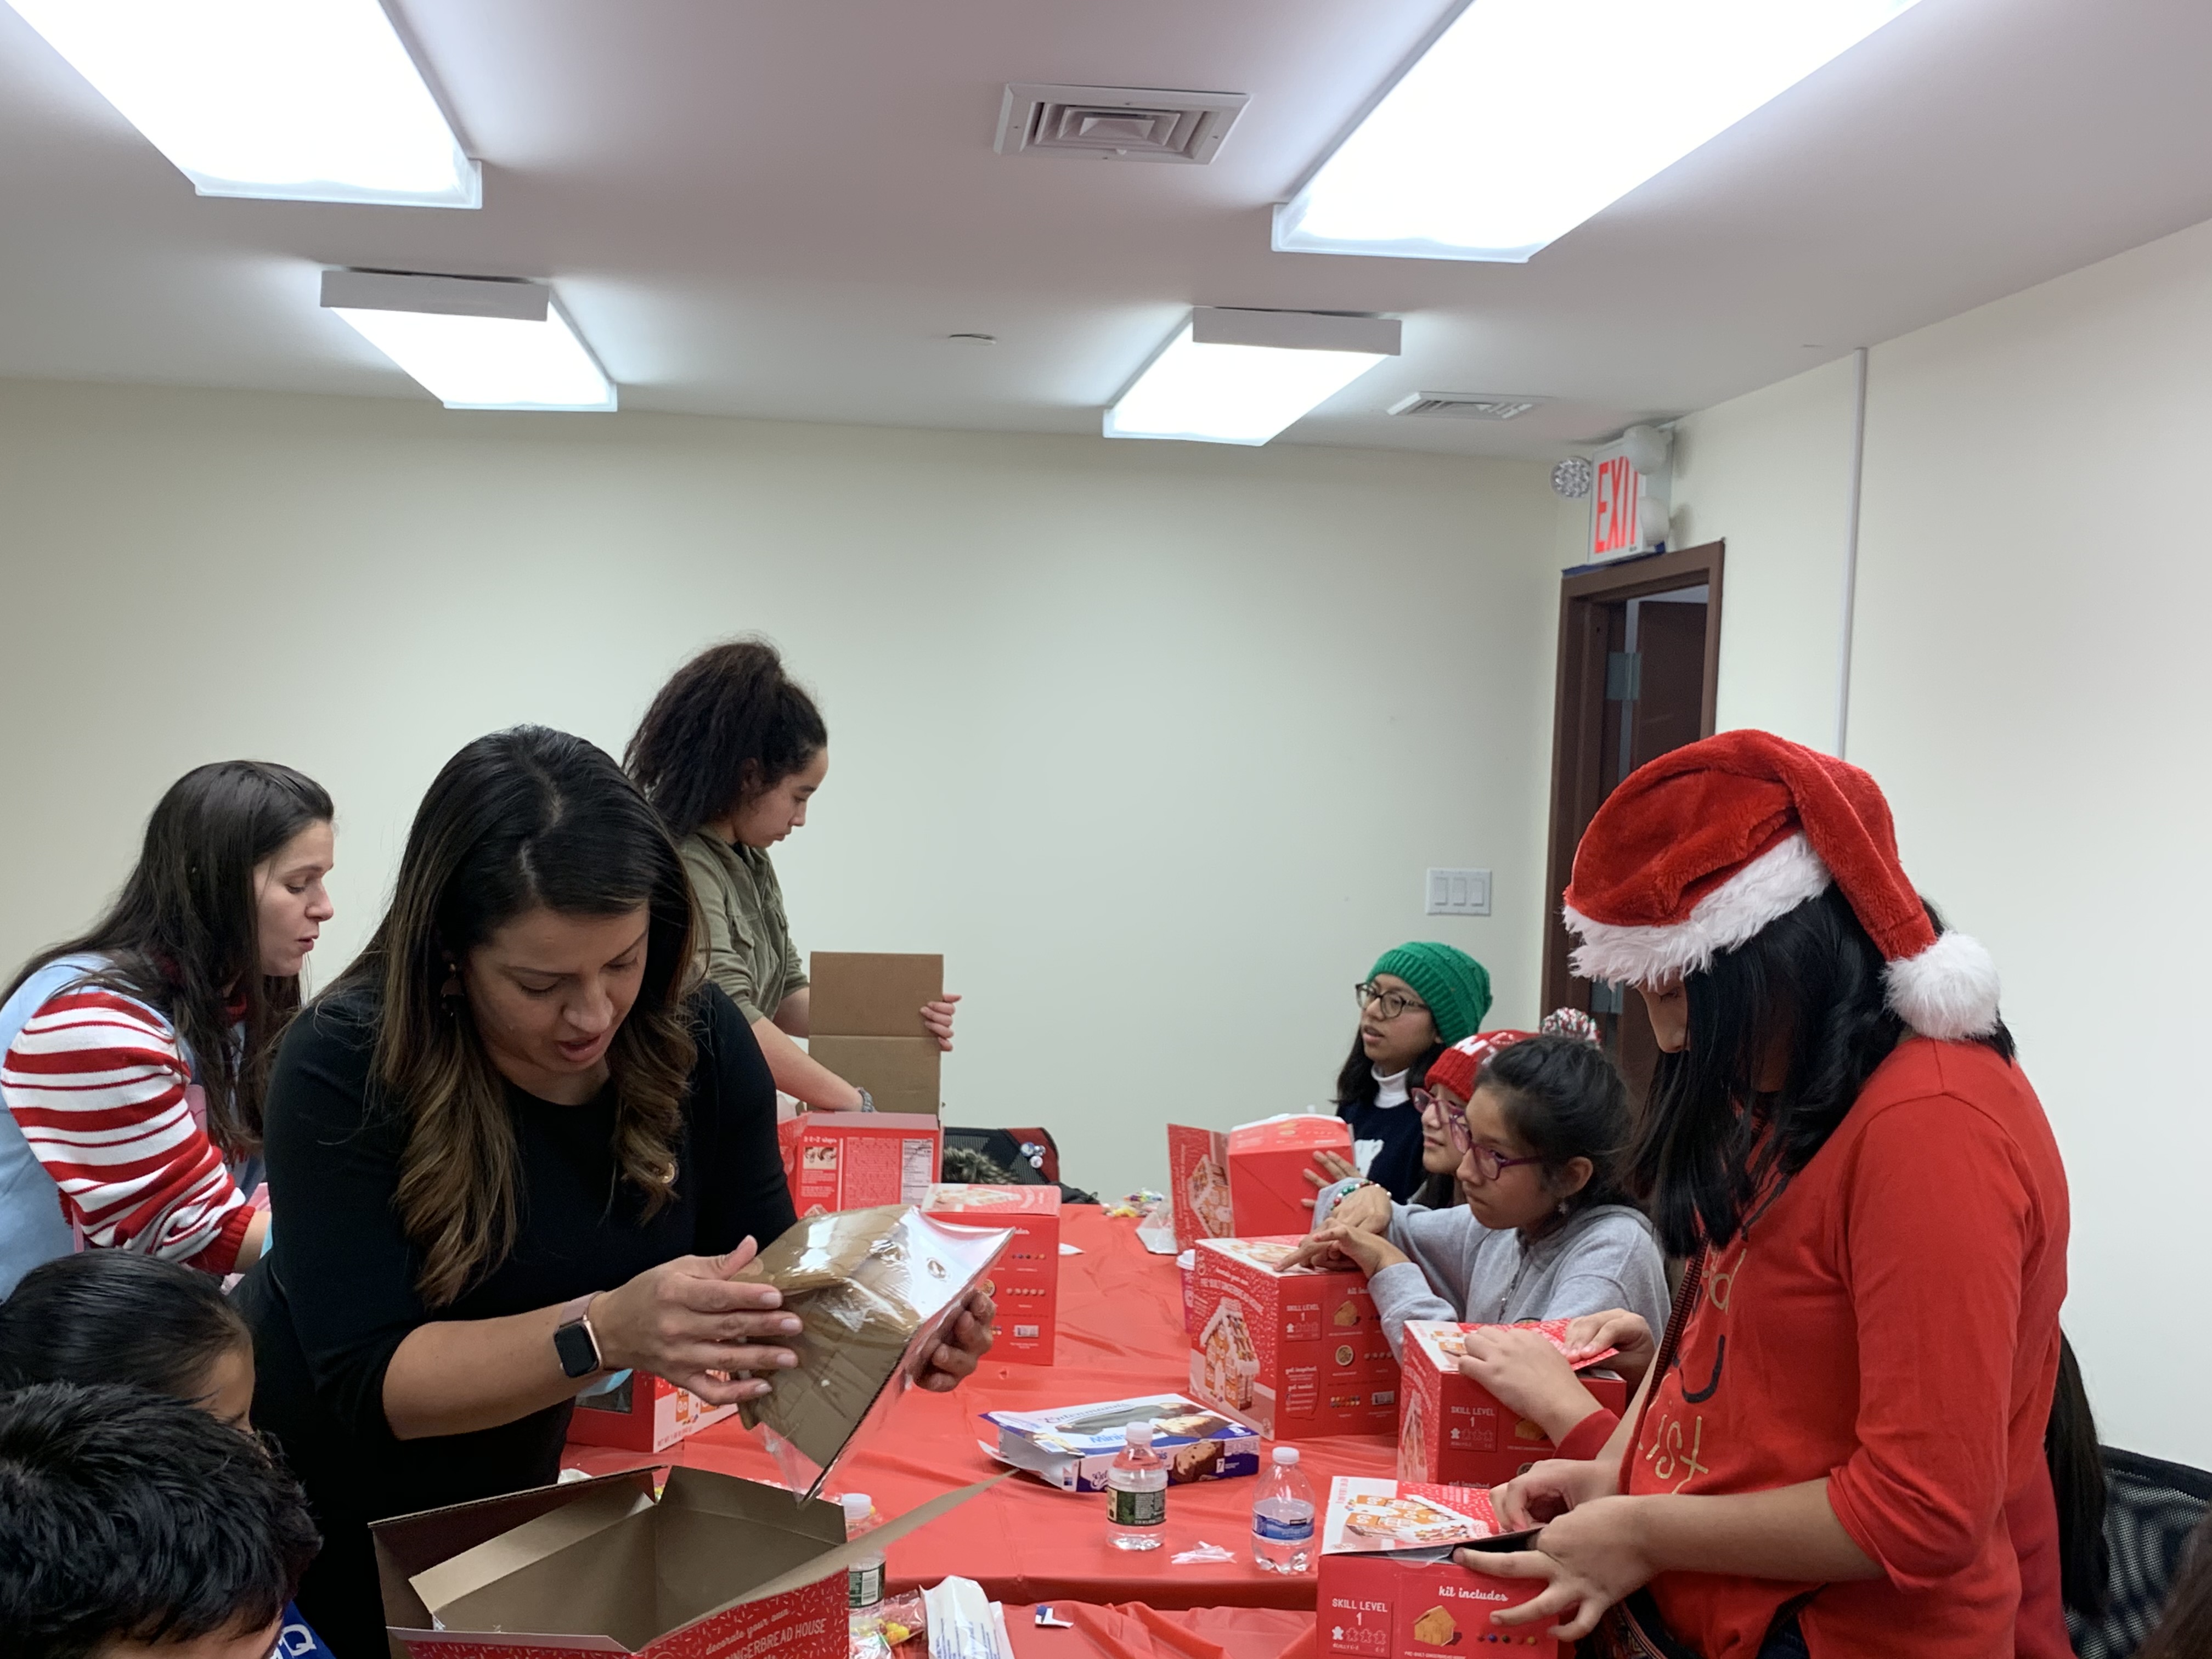 In partnership with Together We Can, Assemblywoman Cruz hosted youth in the office to build gingerbread houses.